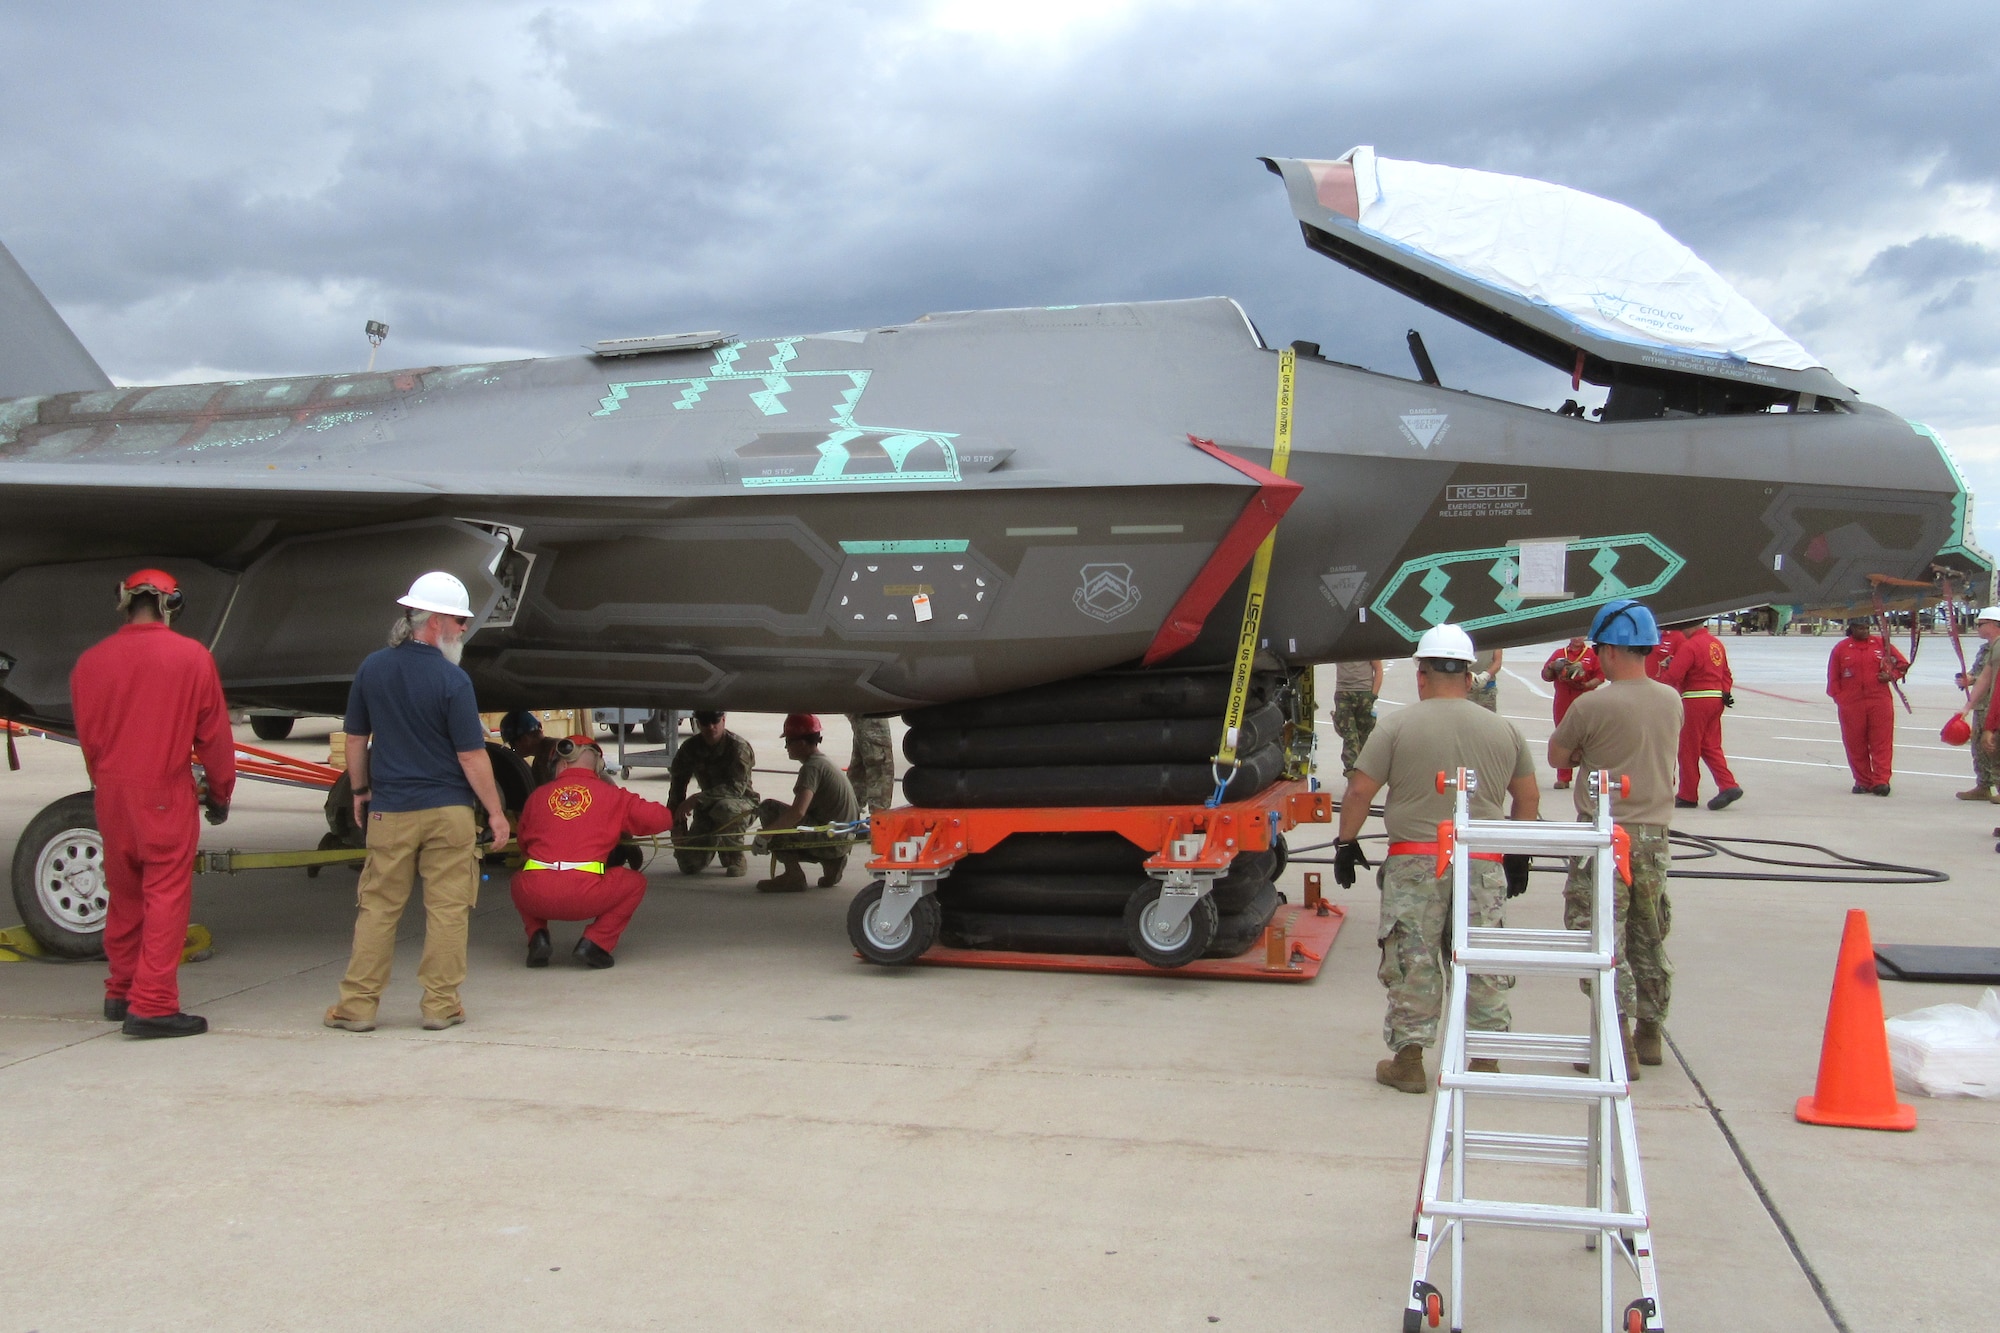 Students doing various tasks around a reassembled F-35 with its nose sitting on airbags.